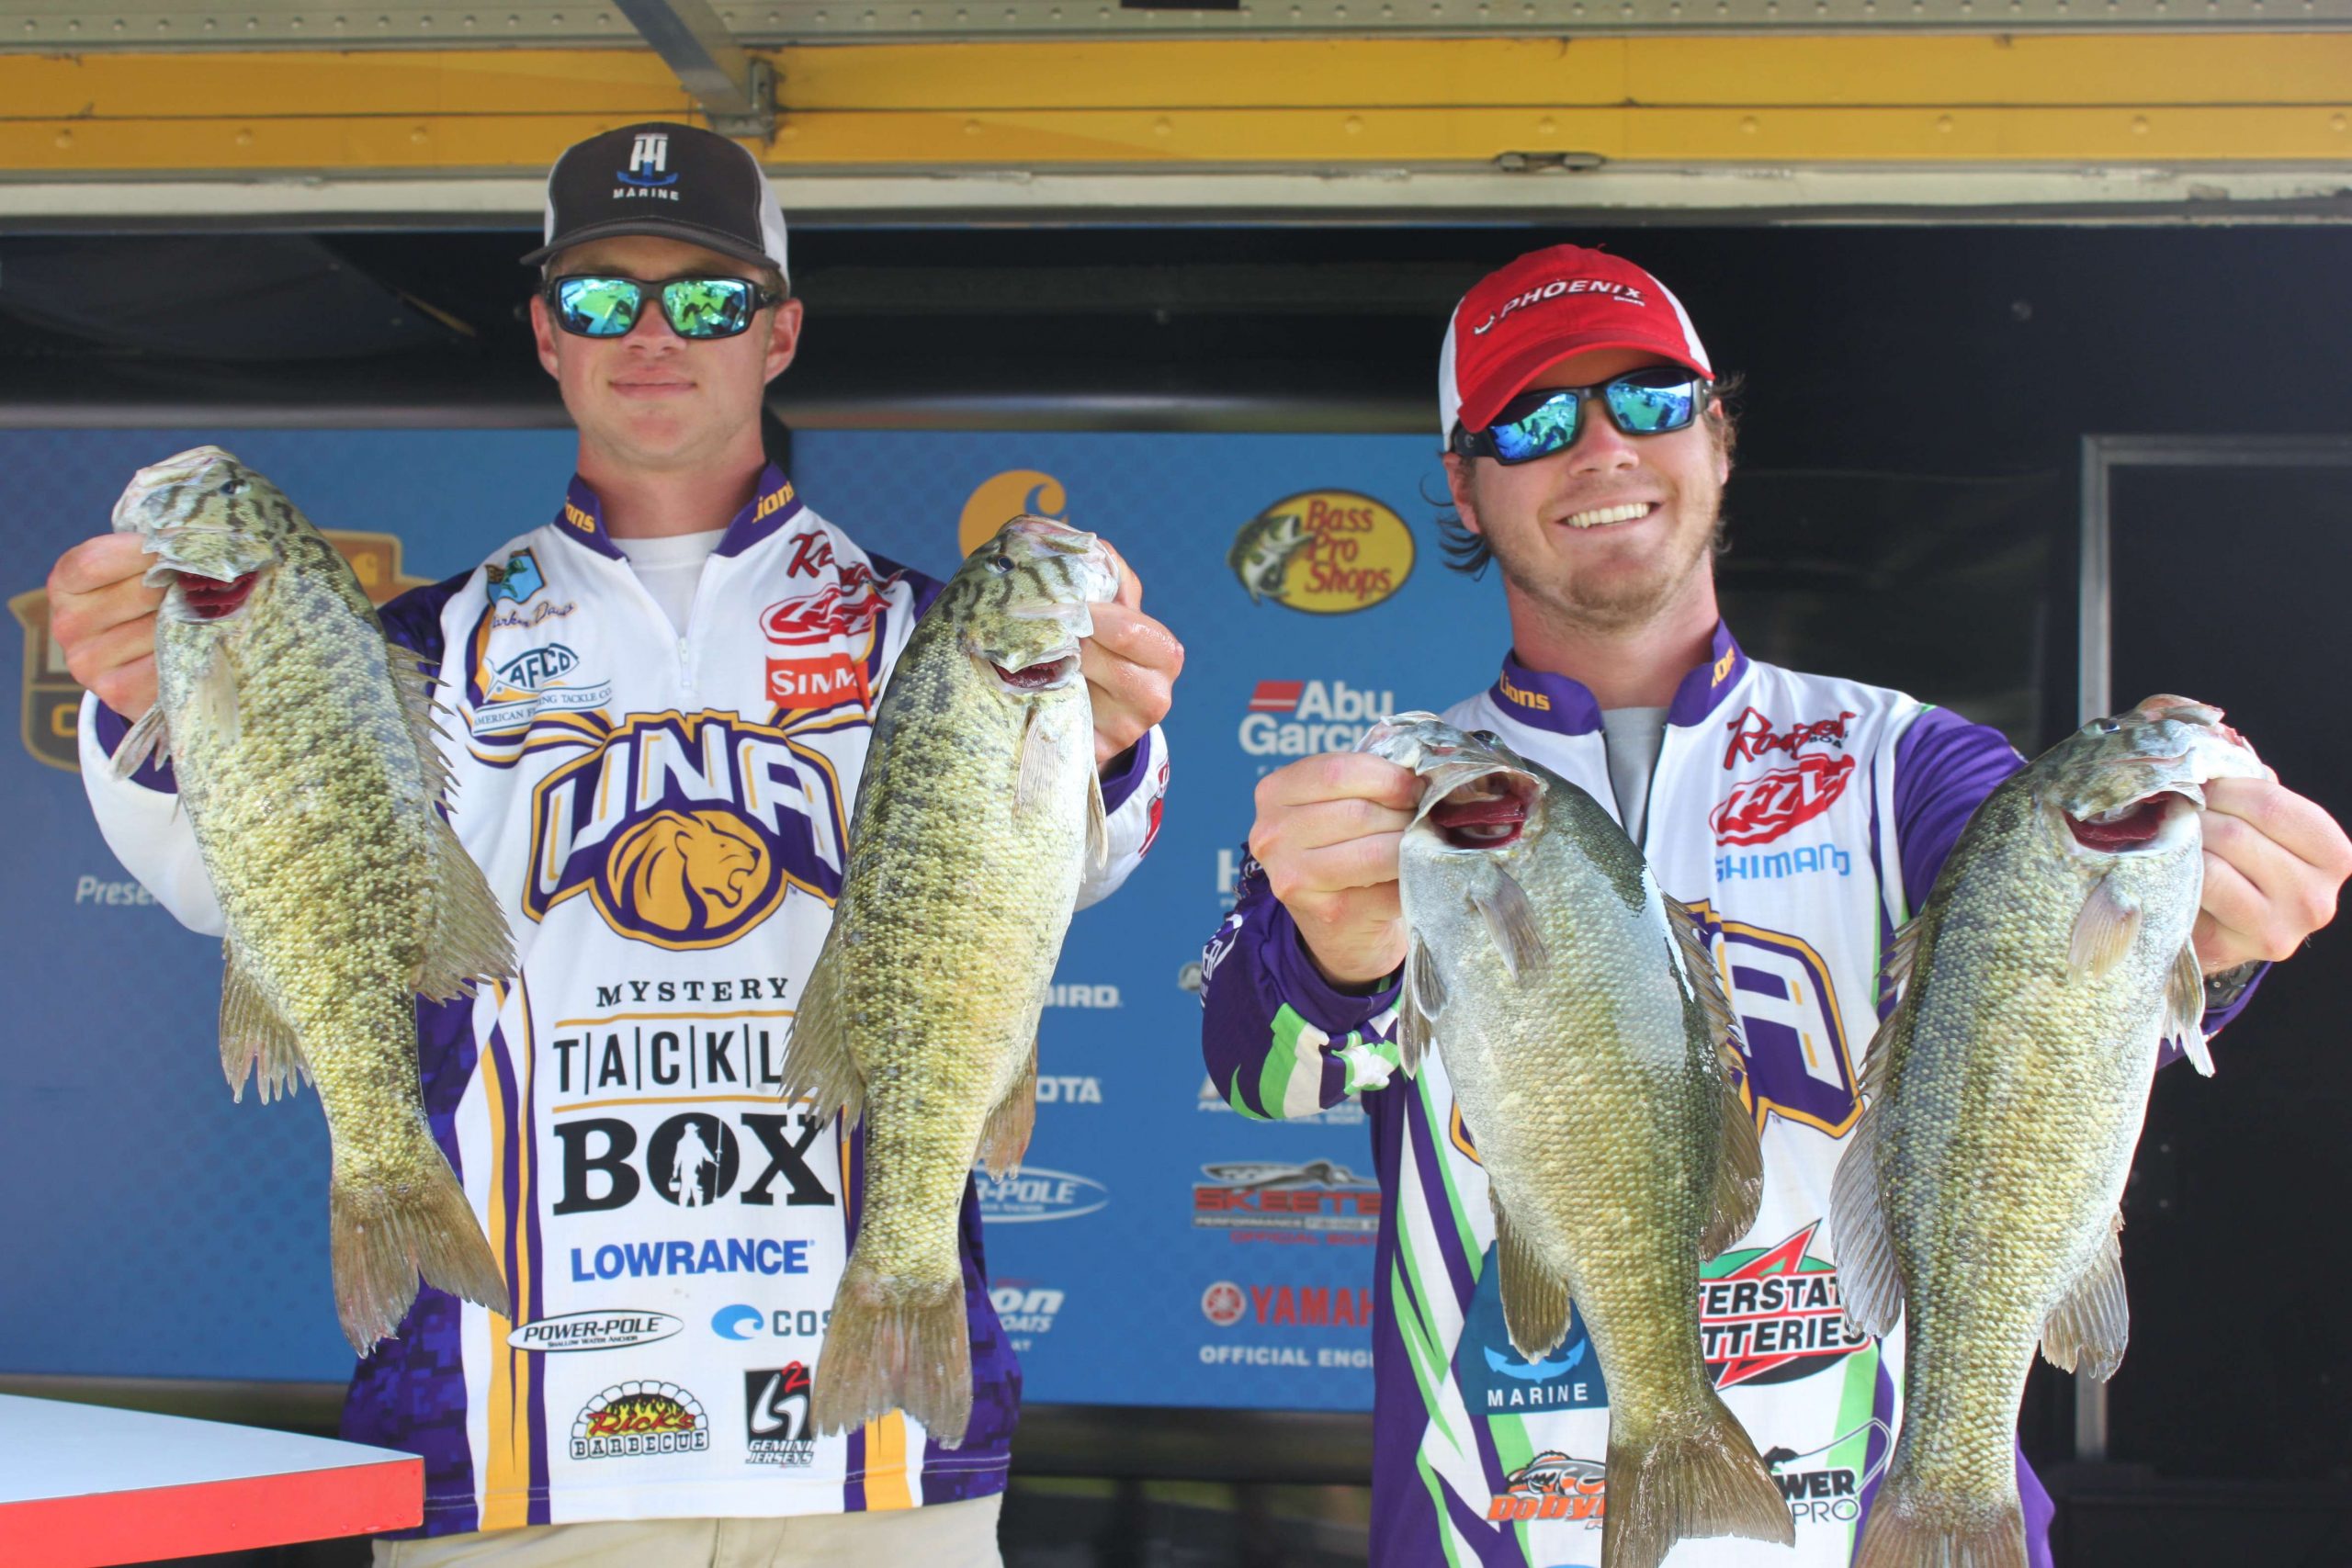 Parker Davis and Ethan Goodwin had one of the best bags on Friday as this 13-7 haul attests.